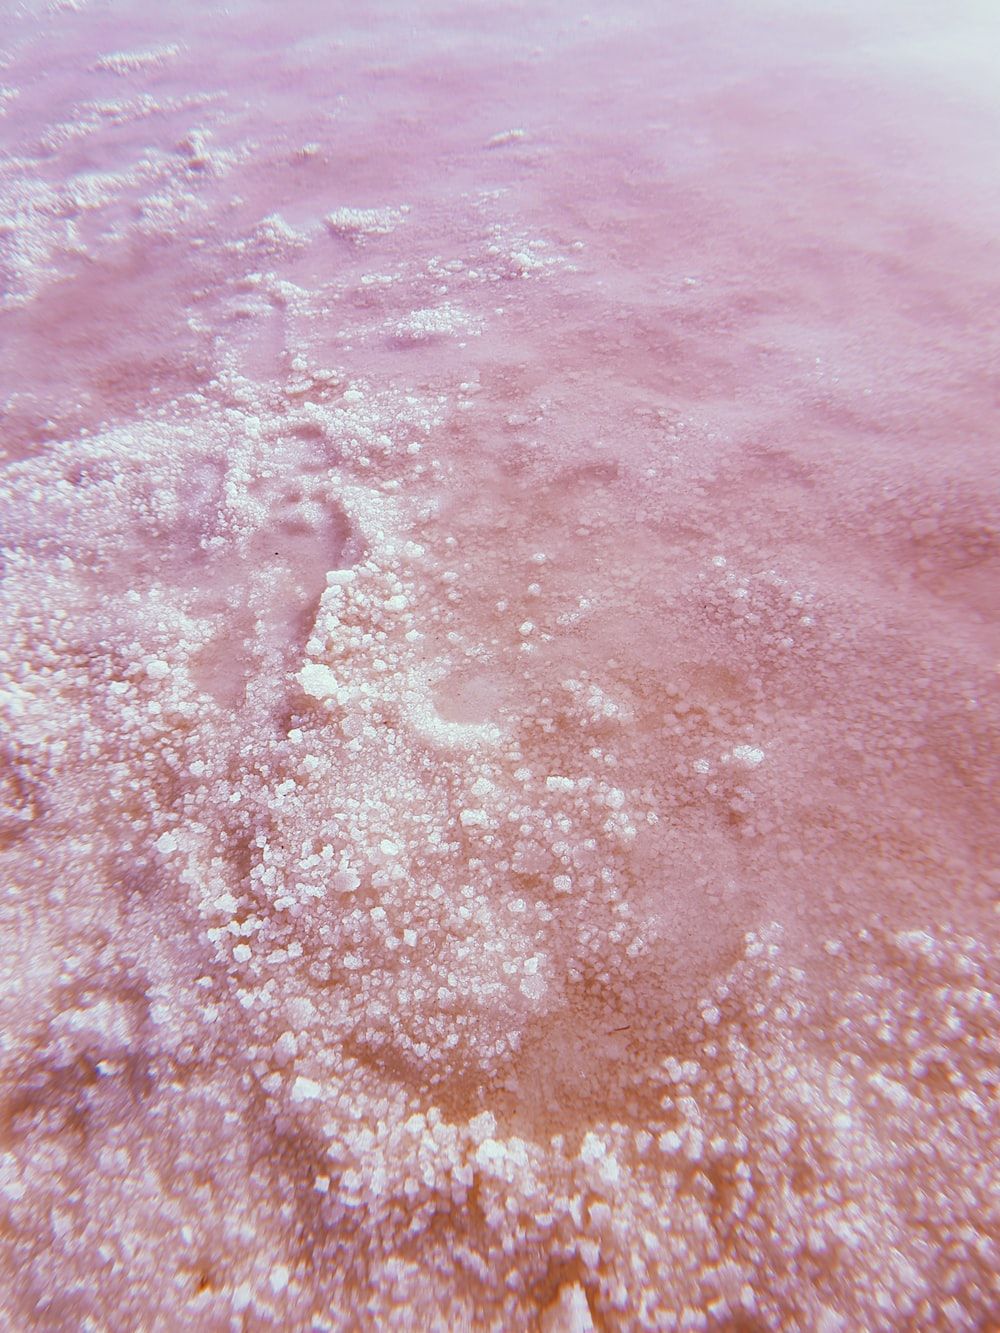 Pink Water Picture. Download Free Image